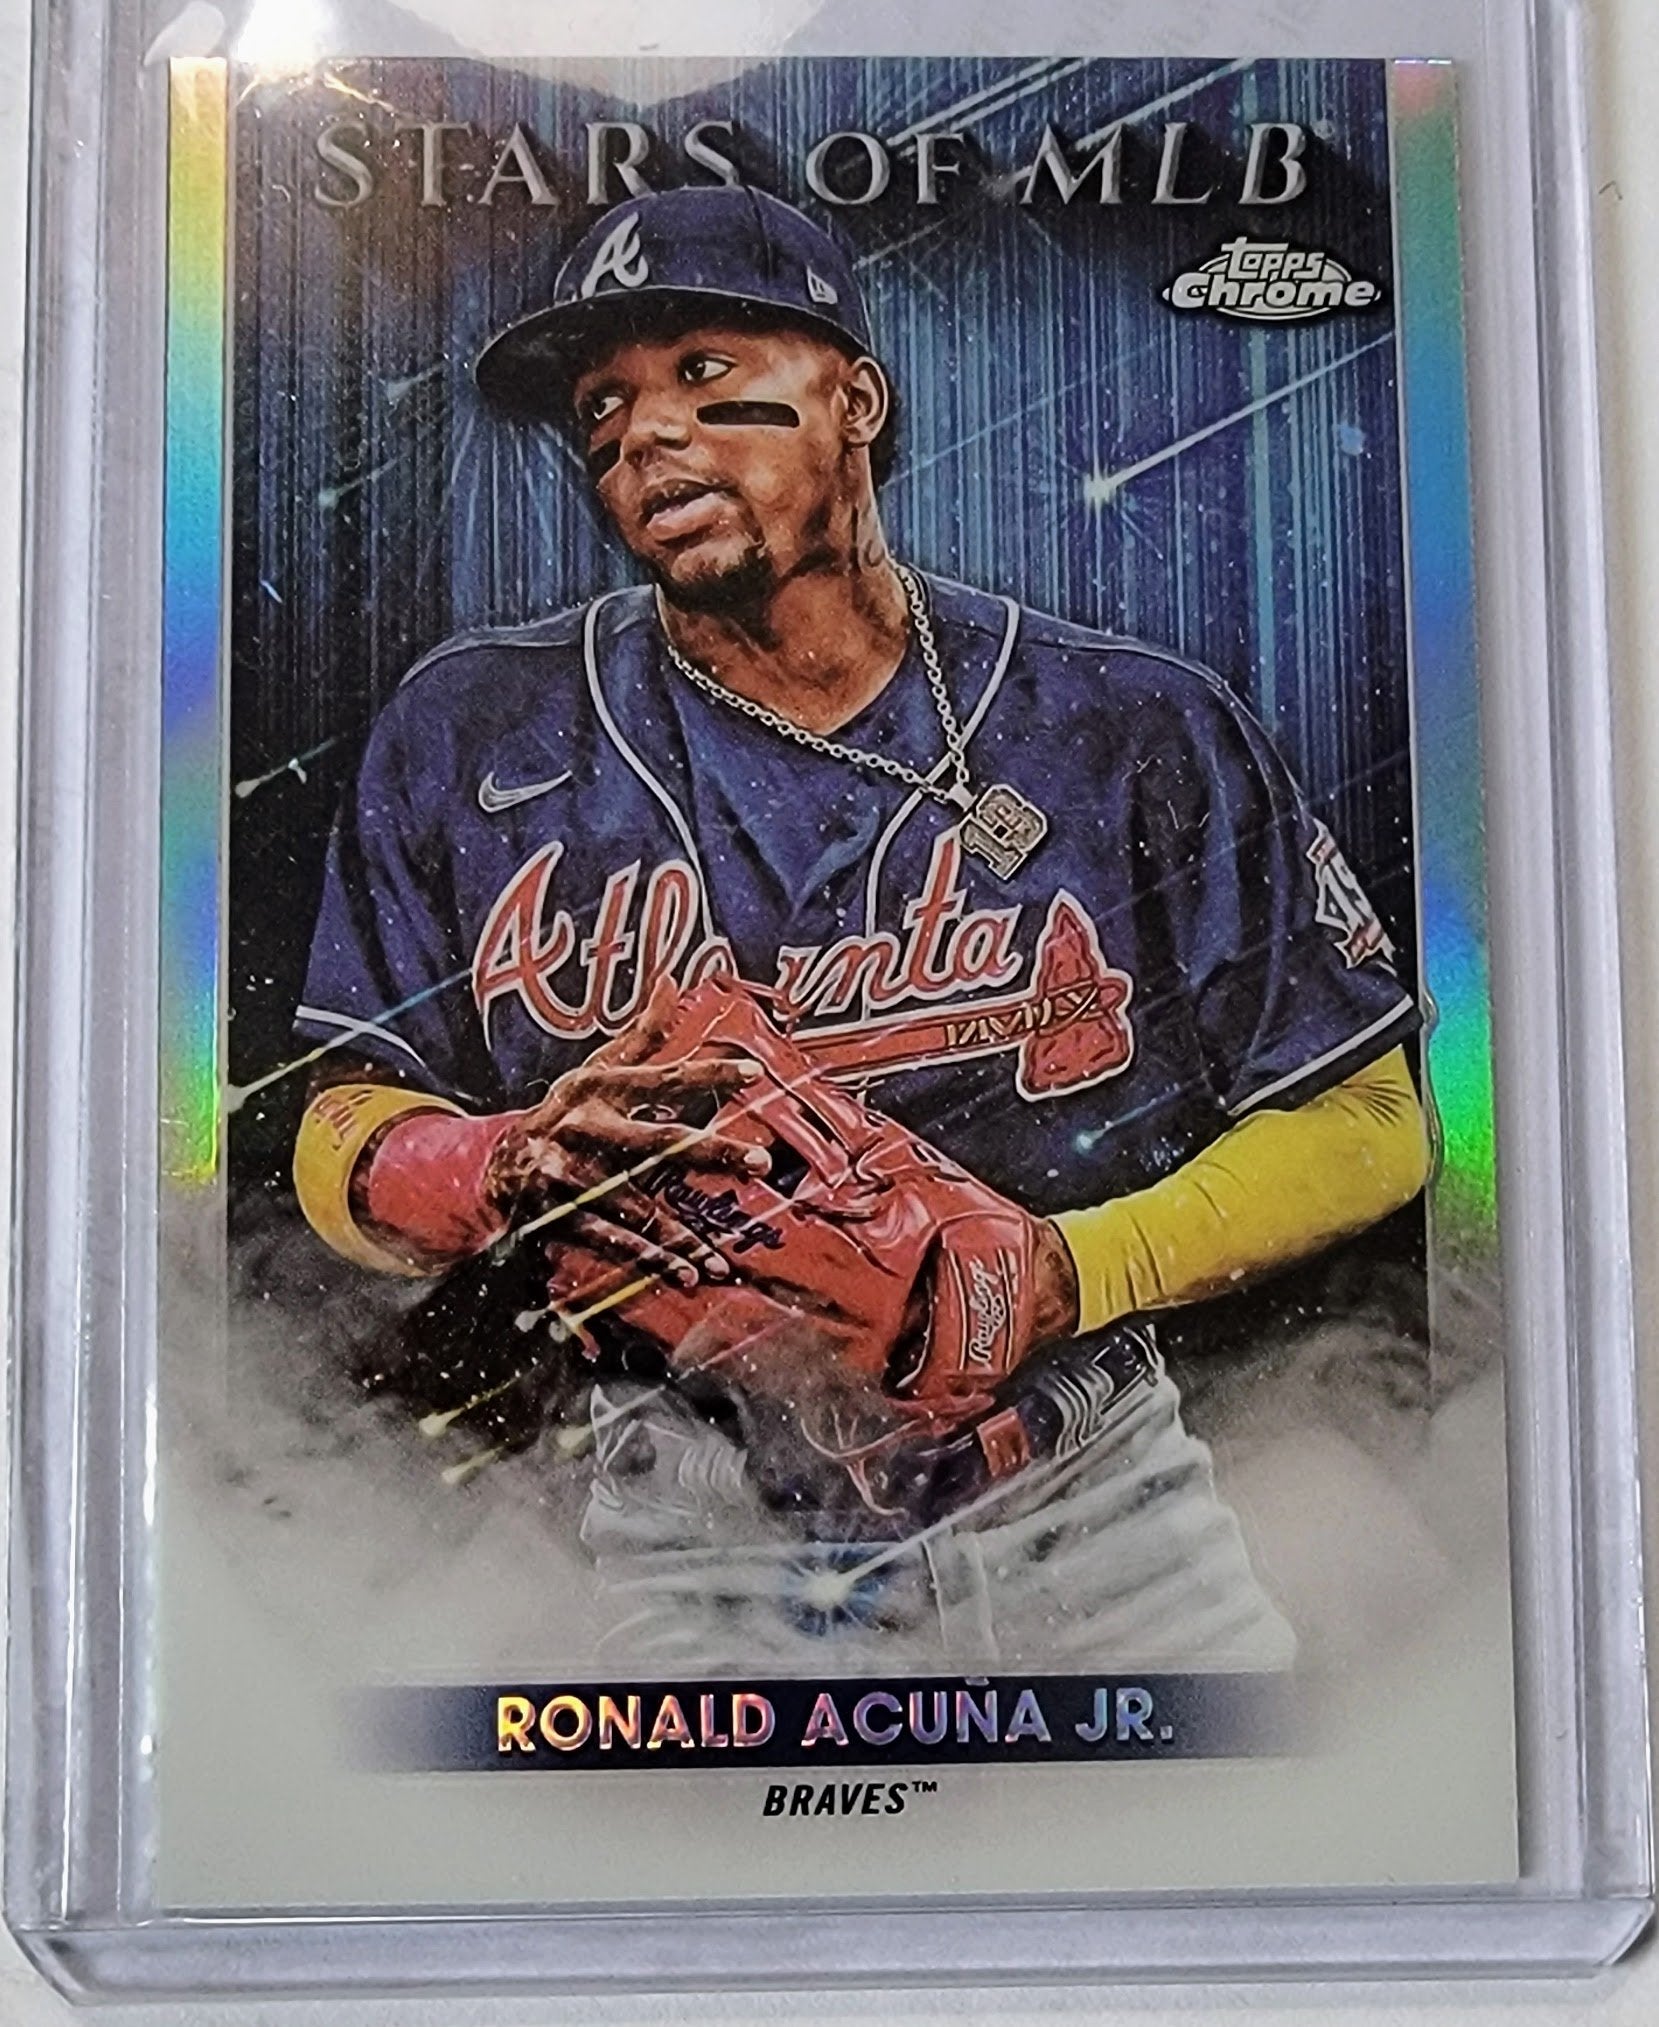 2022 Topps Ronald Acuna Jr Stars of the MLB Baseball Trading Card GRB1 simple Xclusive Collectibles   